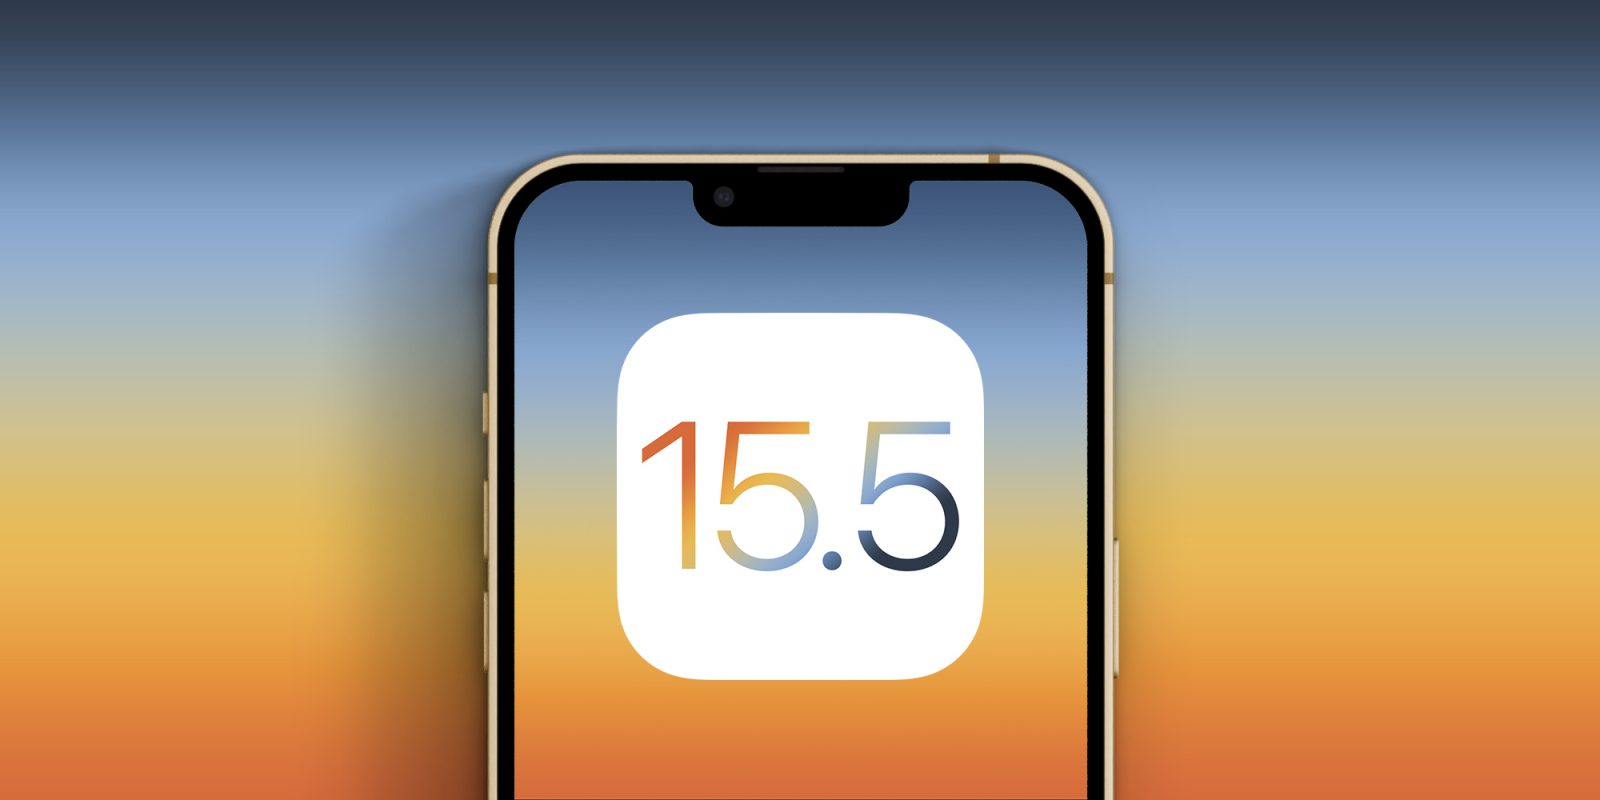 Apple stops signing iOS 15.5 following iOS 15.6 release, downgrade is no longer possible